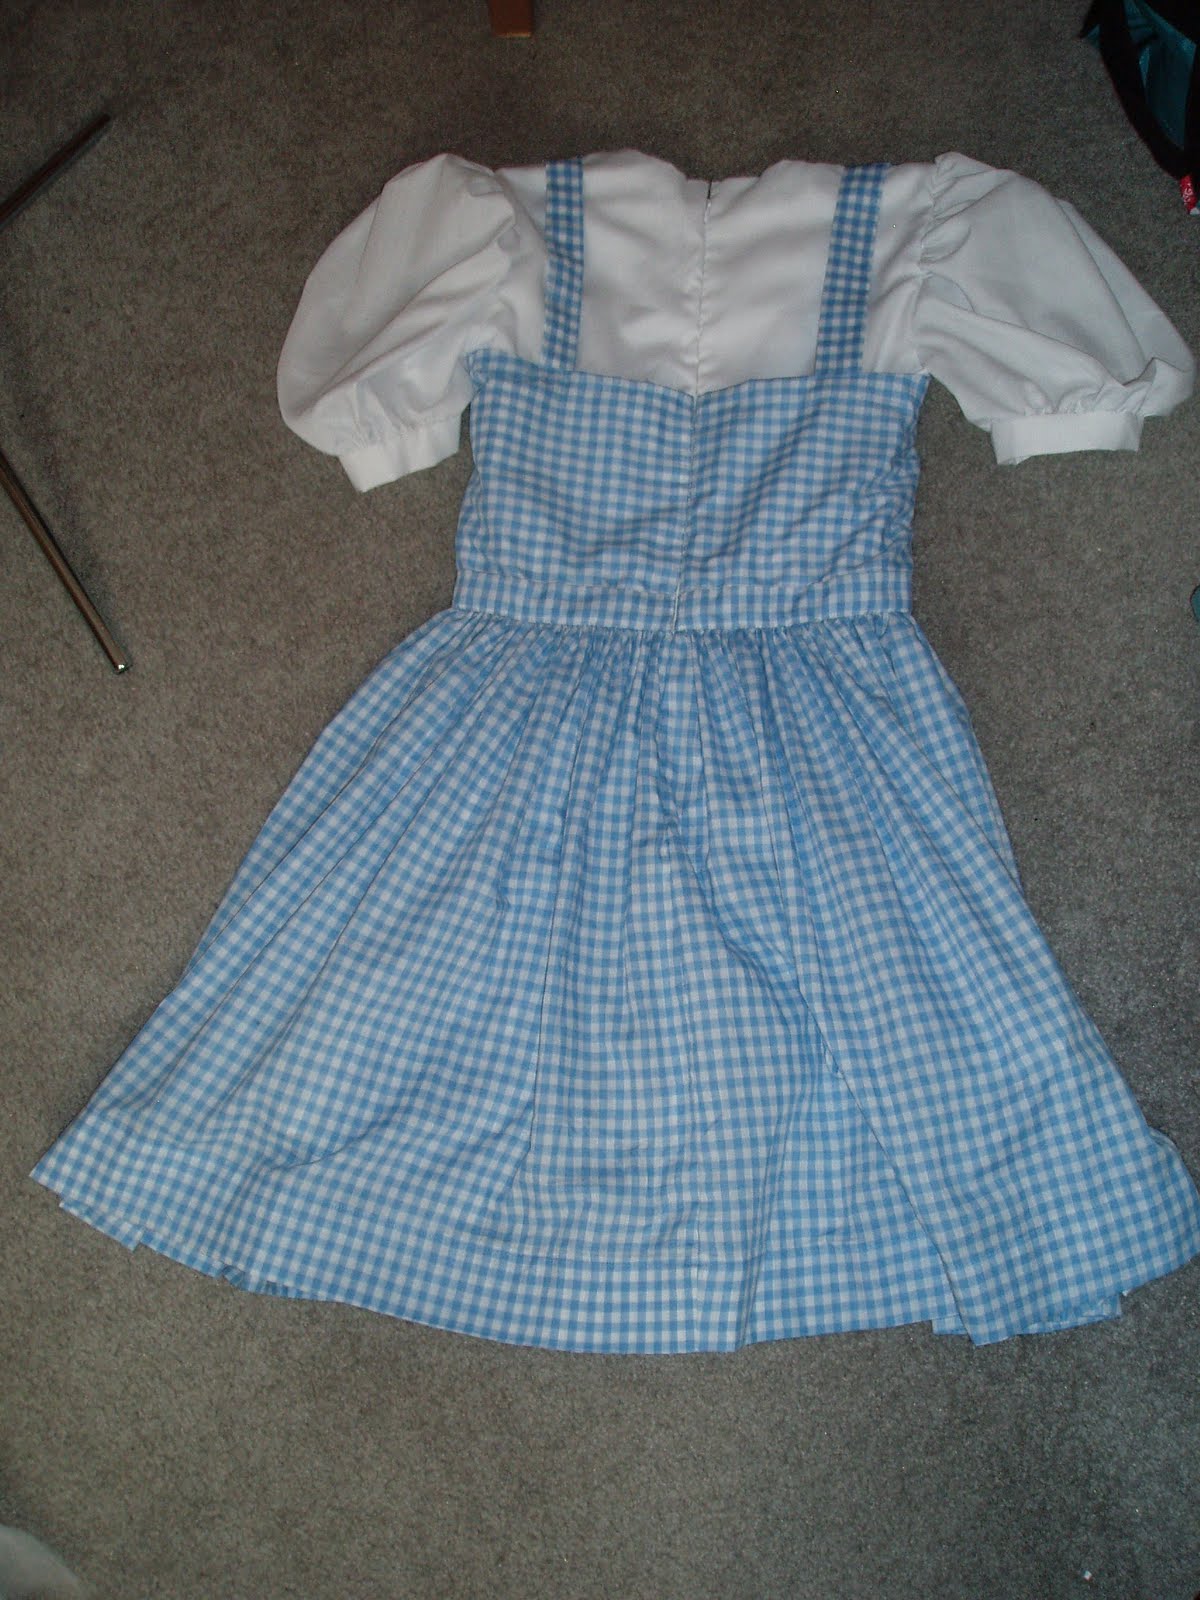 Children&apos;s Sewing Patterns for Fancy Dress Costumes